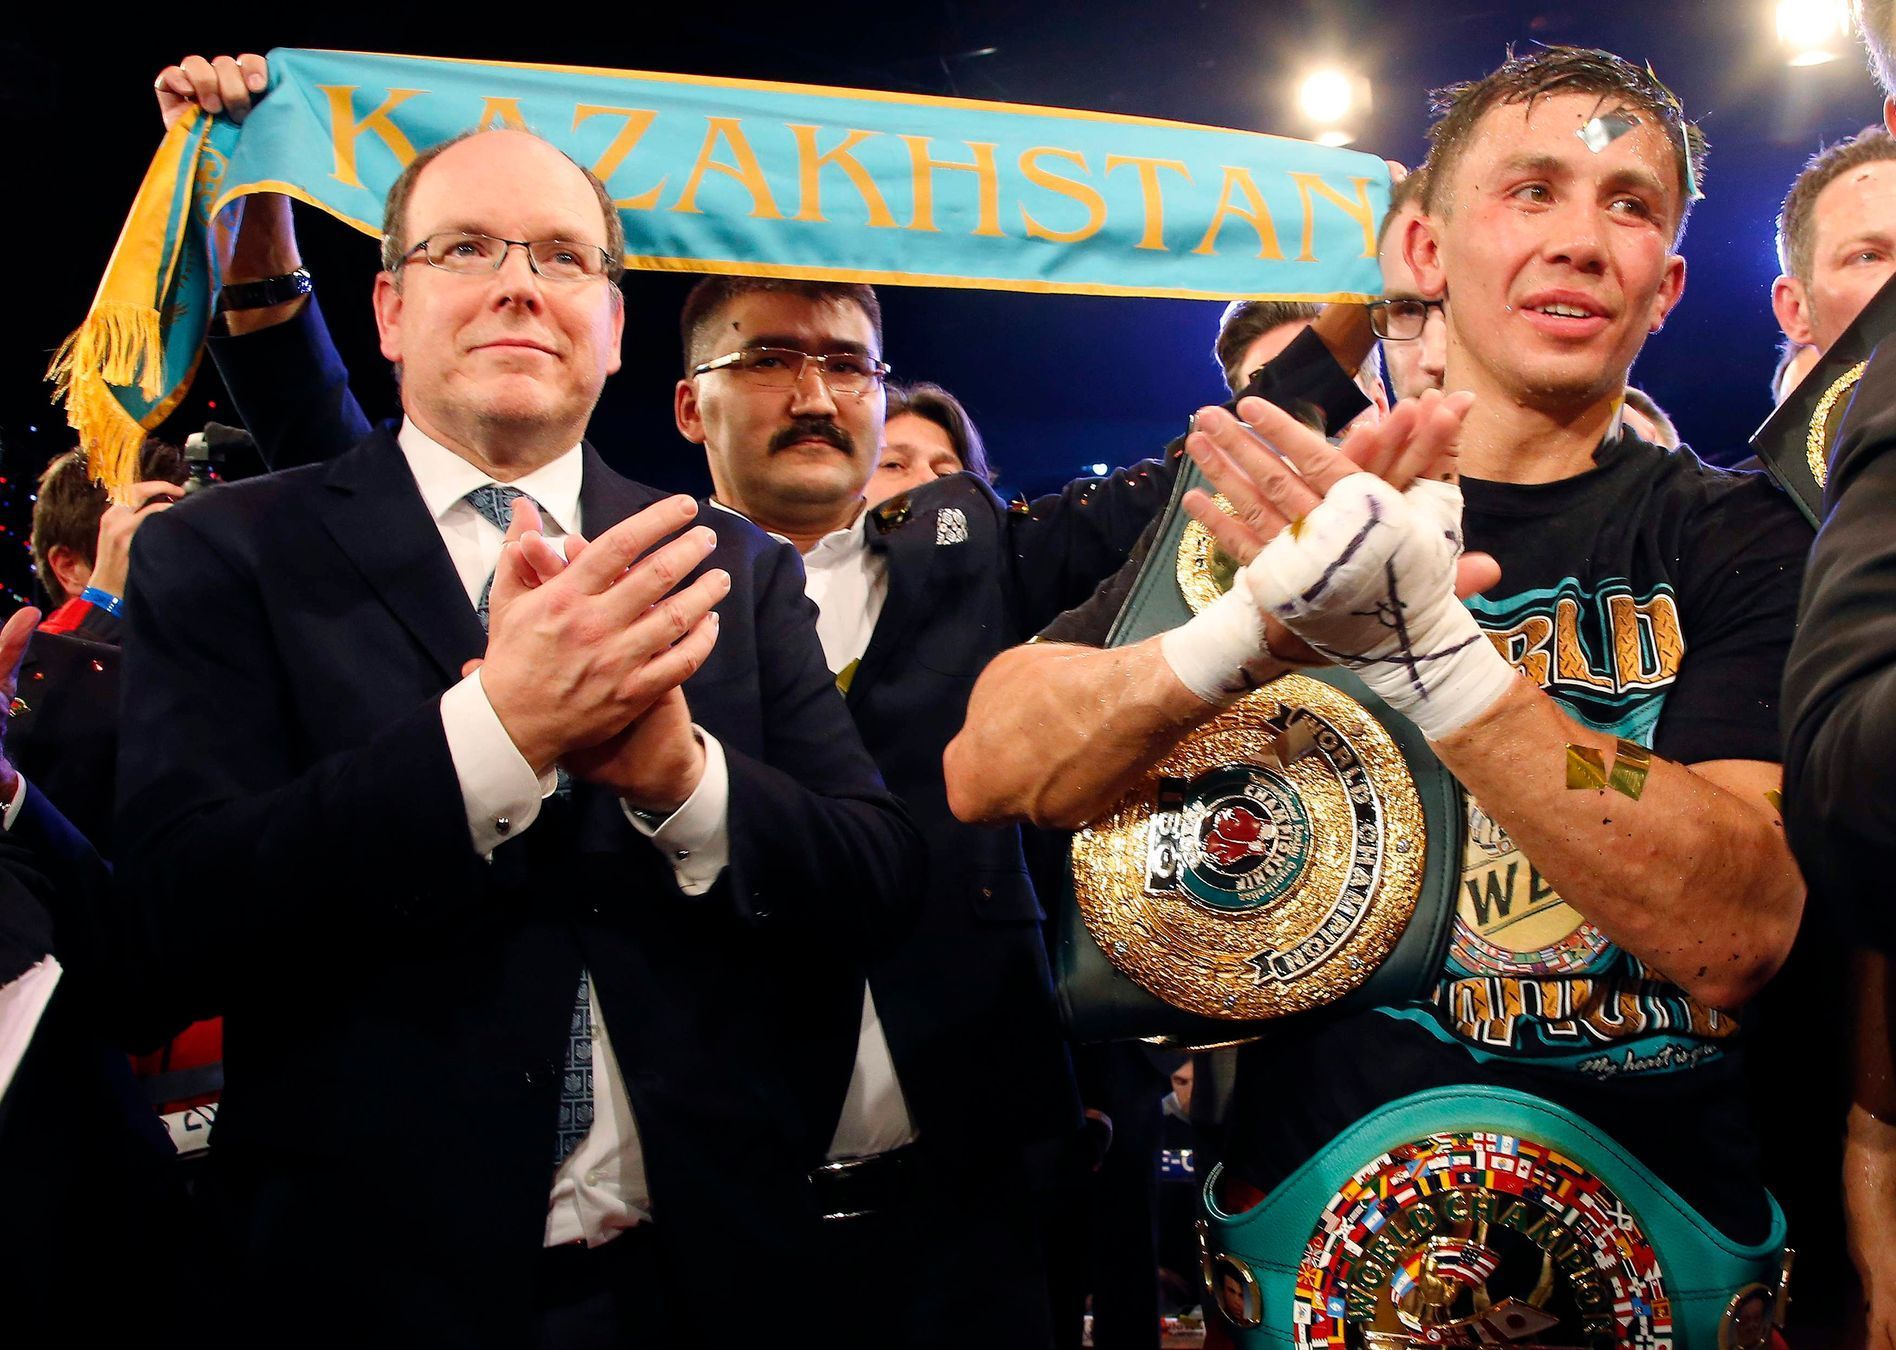 World champion Golovkin of Kazakhstan reacts after defeating Murray of England during the WBA-WBC-IBO Middleweight World Championship, while Prince Albert II of Monaco looks on, in Monte Carlo